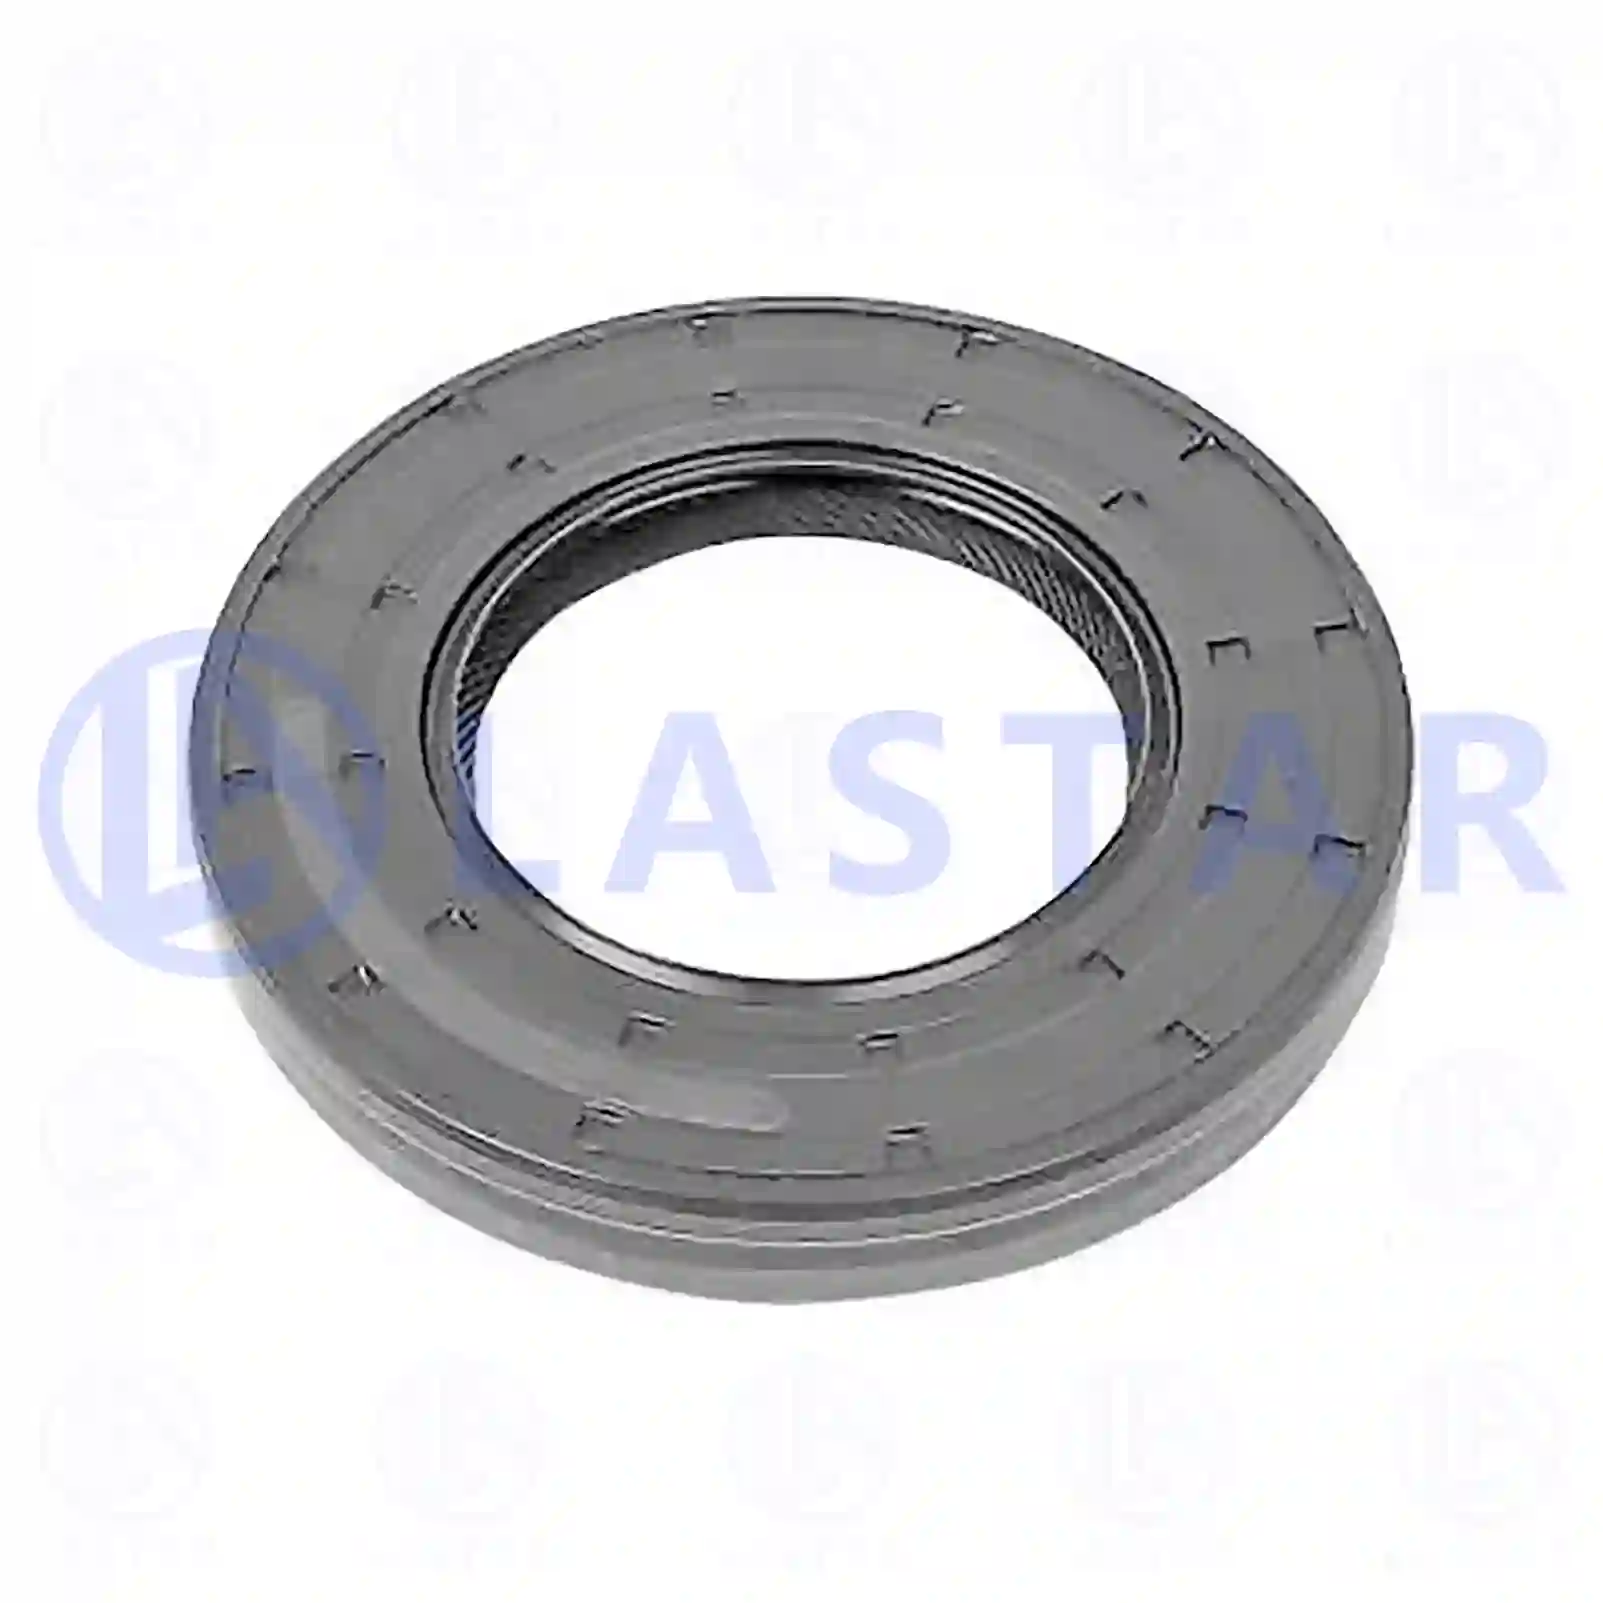 Oil seal, 77733172, 08870829, 42534932, 8870829, 5001847404 ||  77733172 Lastar Spare Part | Truck Spare Parts, Auotomotive Spare Parts Oil seal, 77733172, 08870829, 42534932, 8870829, 5001847404 ||  77733172 Lastar Spare Part | Truck Spare Parts, Auotomotive Spare Parts